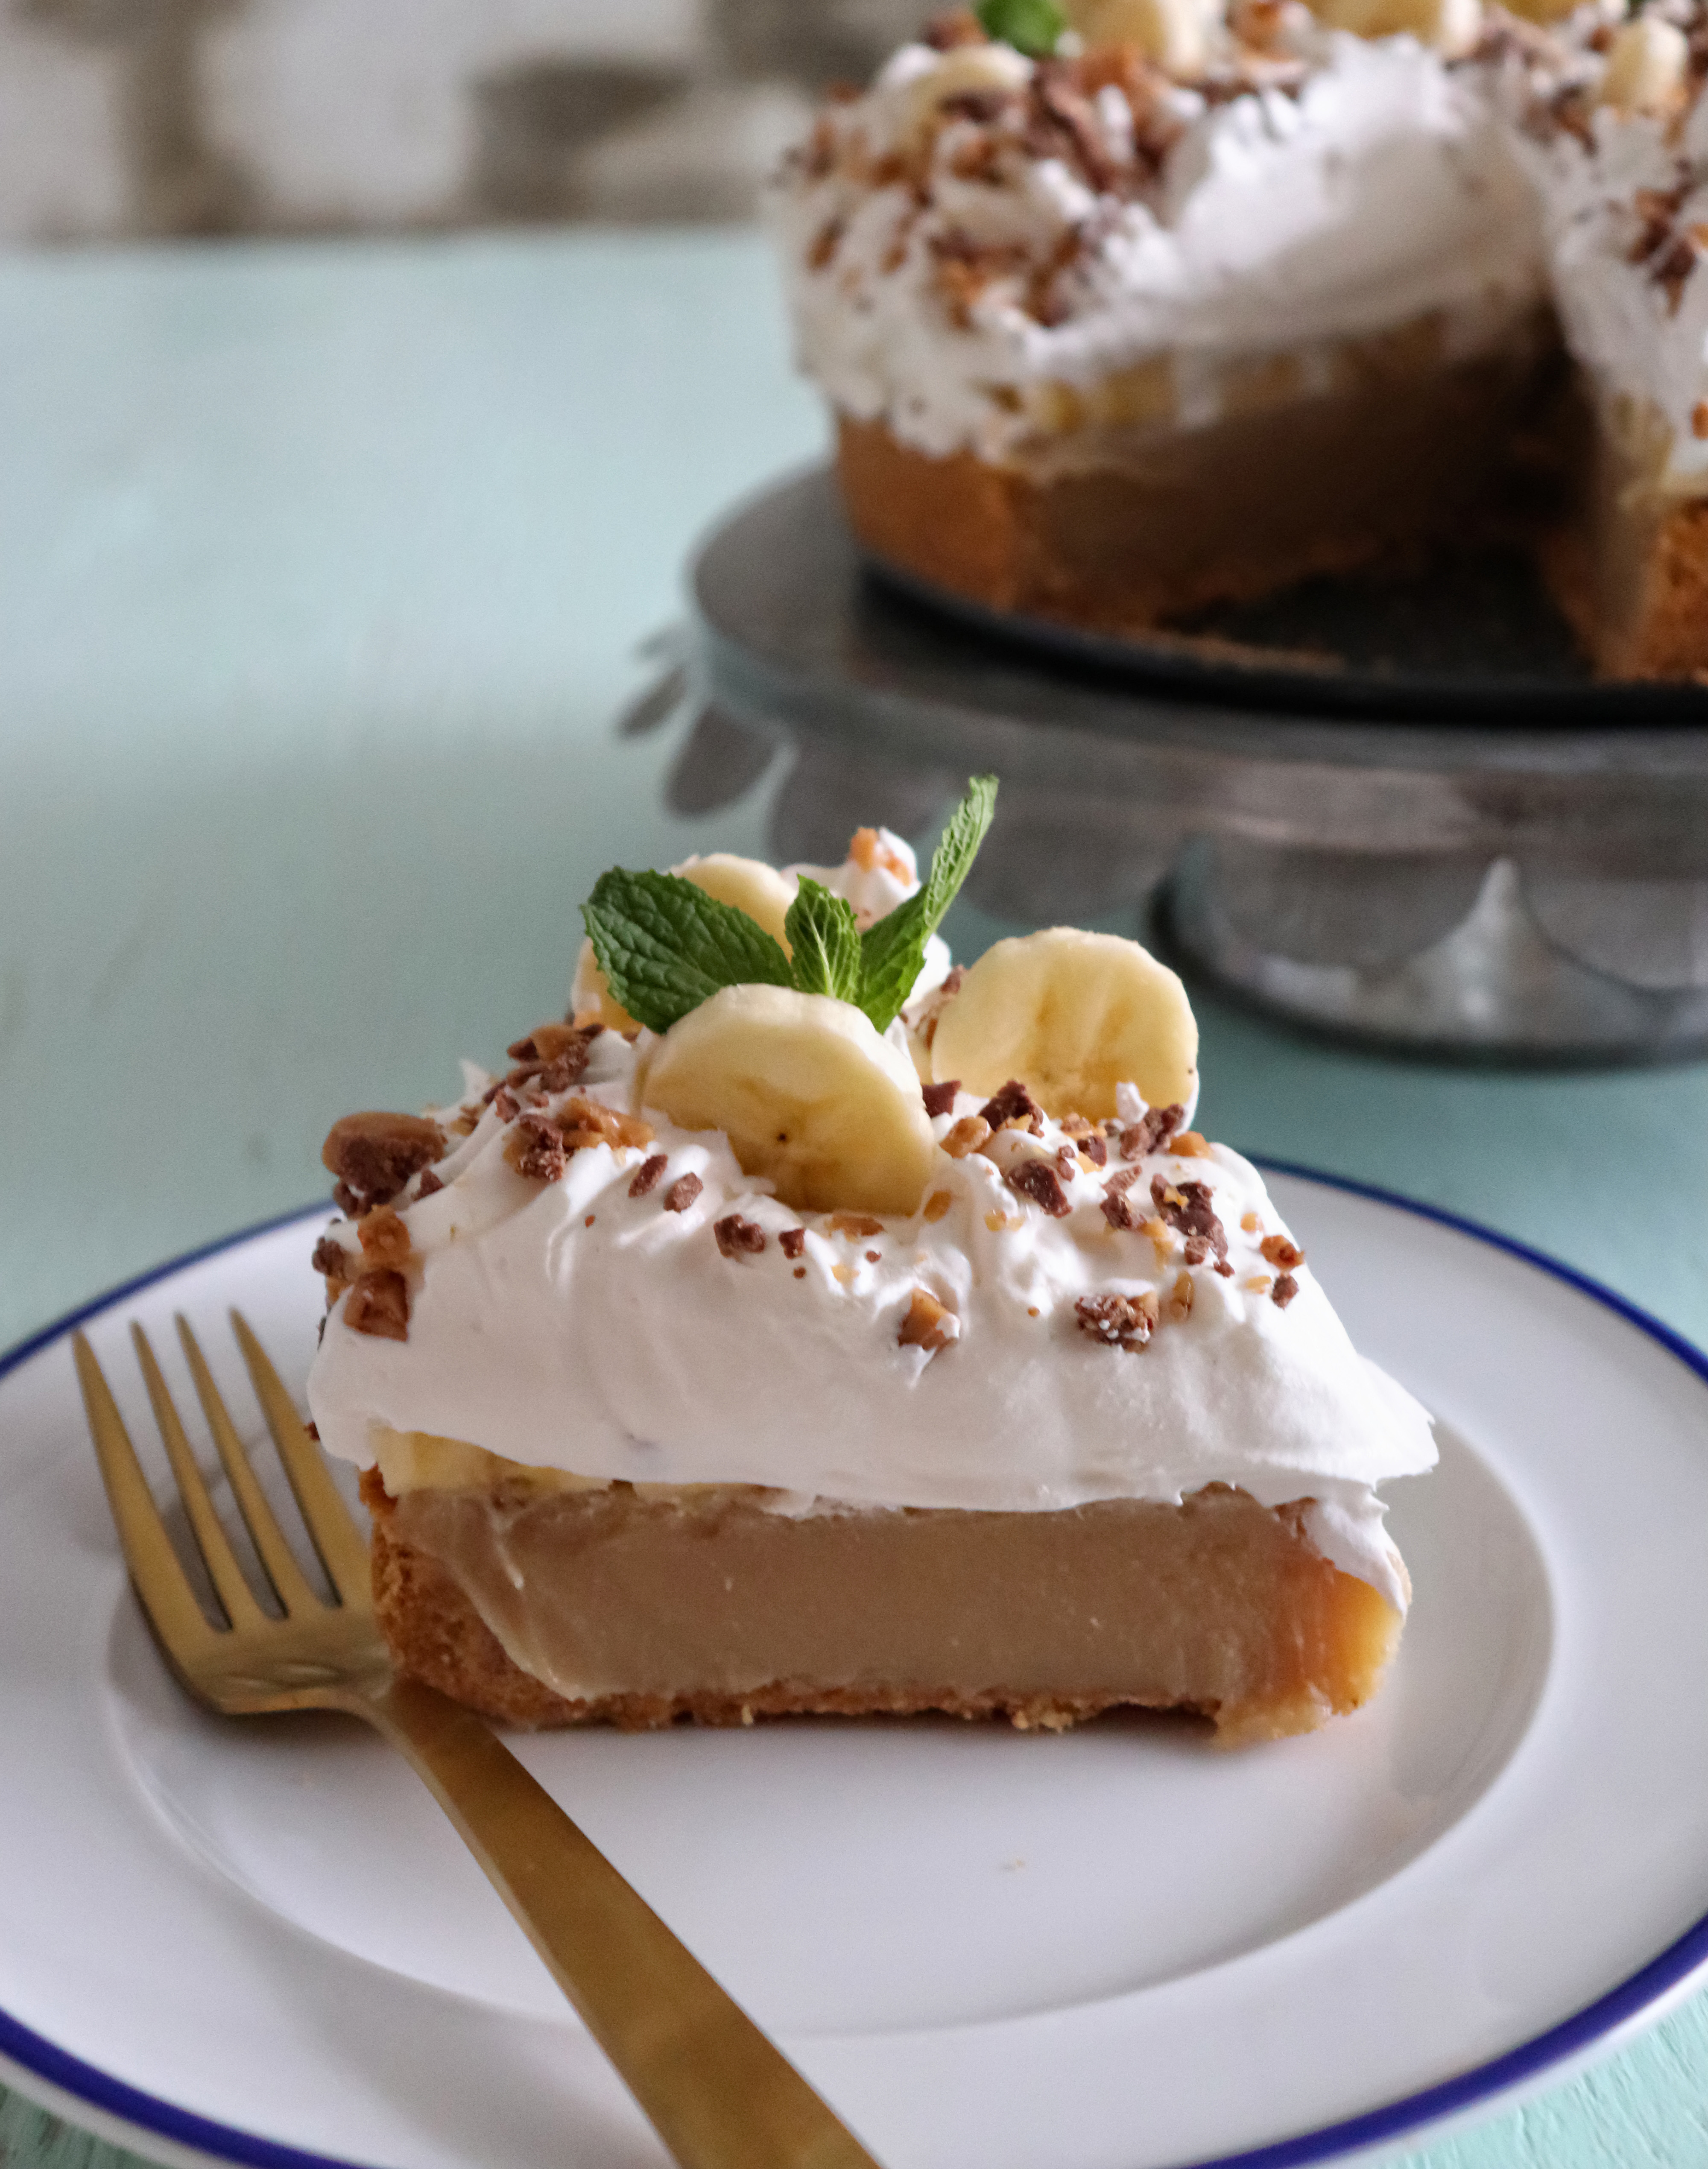 Banoffee Pie | Courtesy of Stacey Shanner